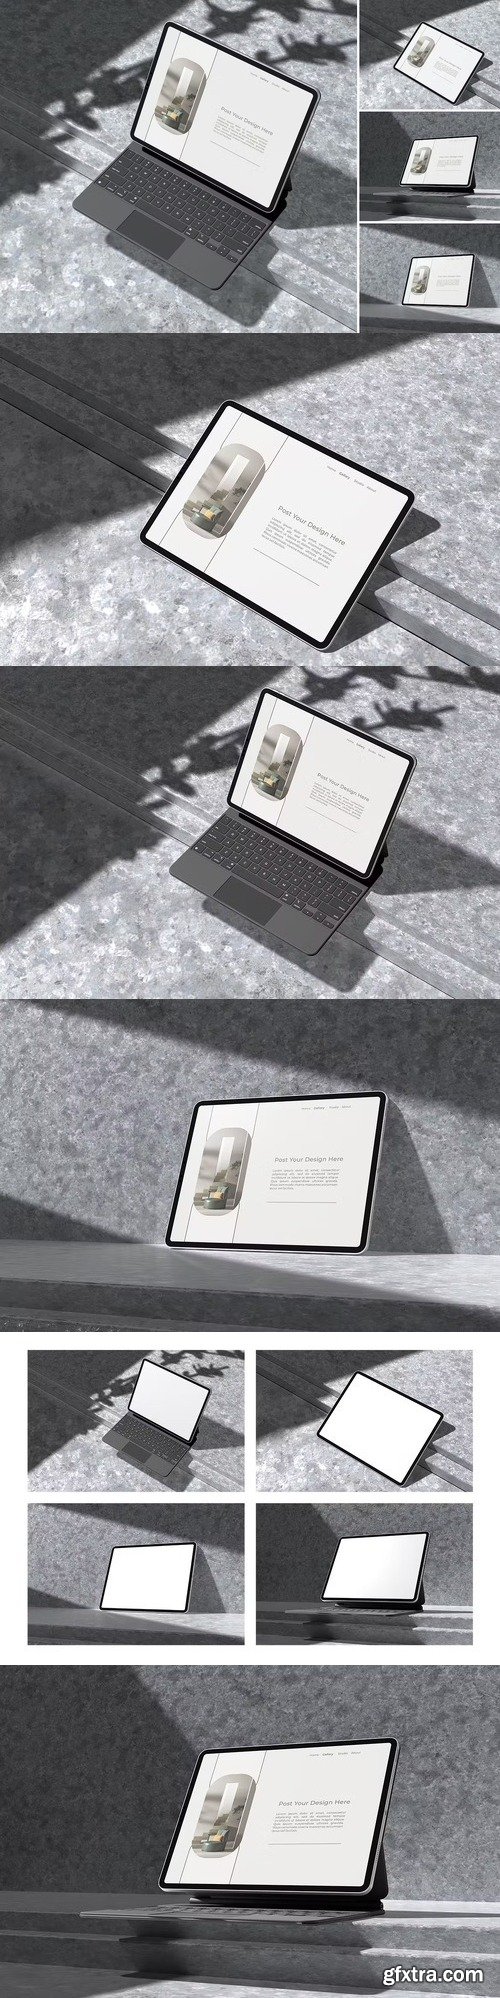 Tablet Mockup with shadow Overlay